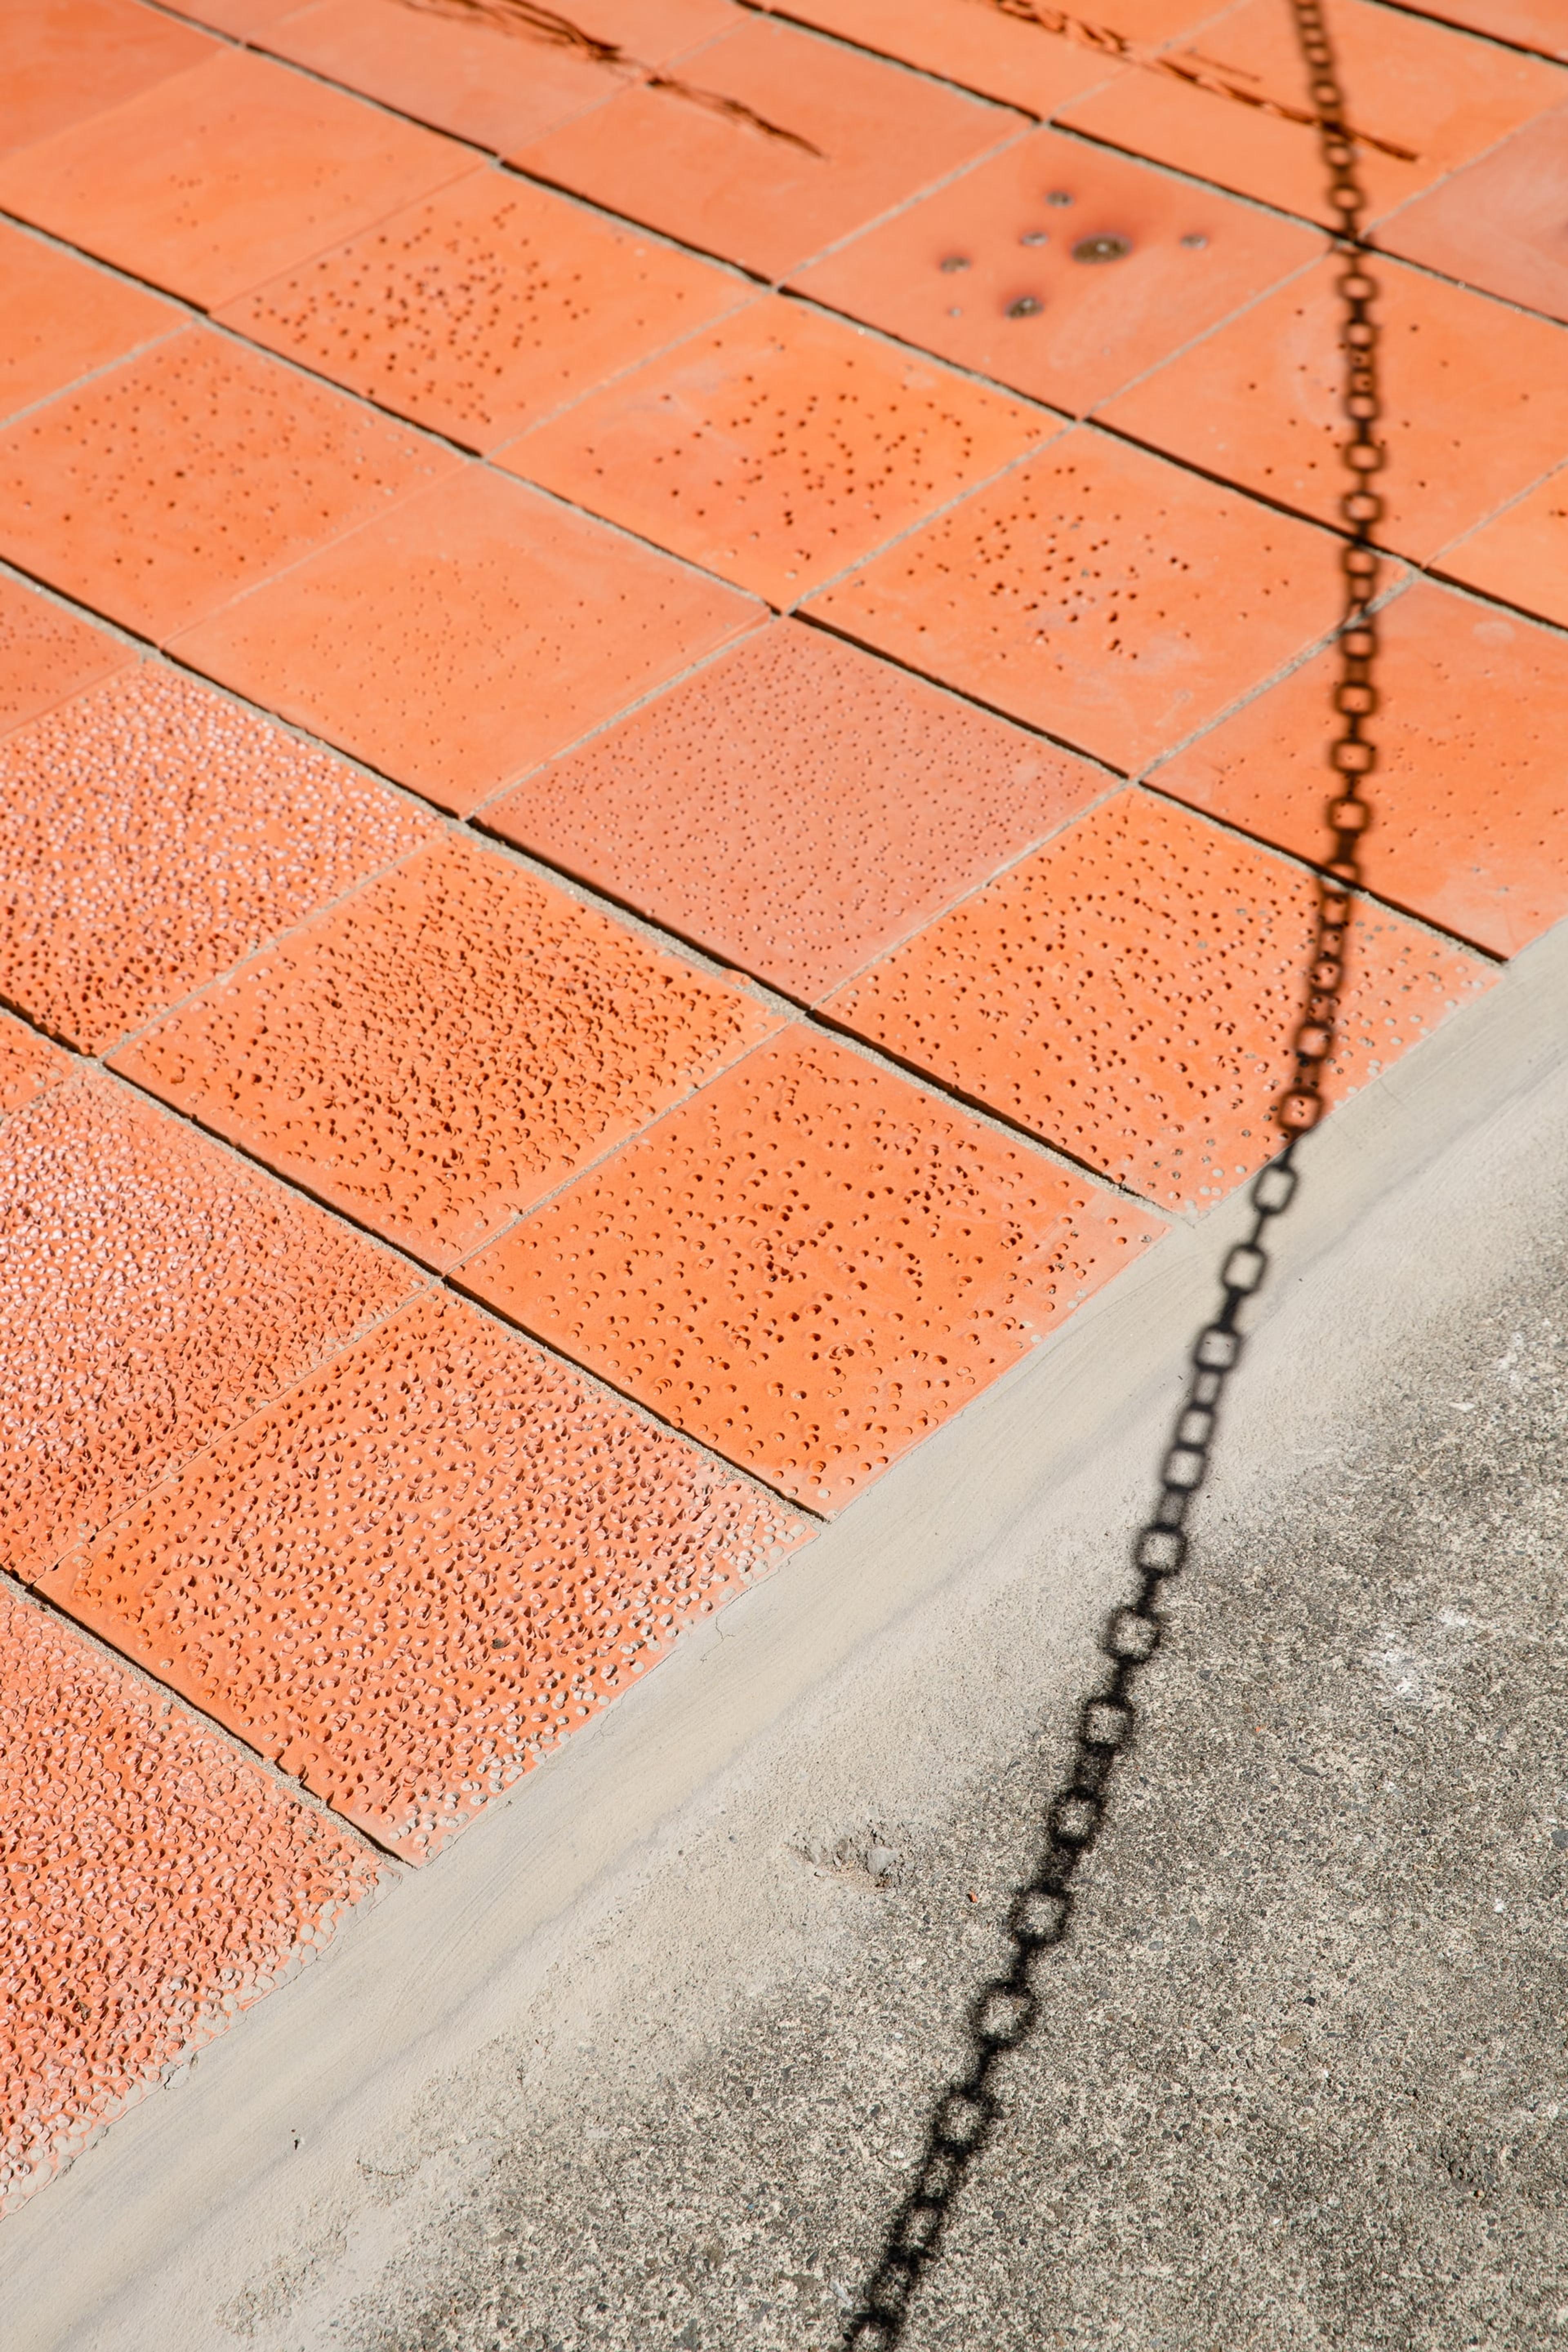 terracotta tiles with small dot marks and the shadow of a chain